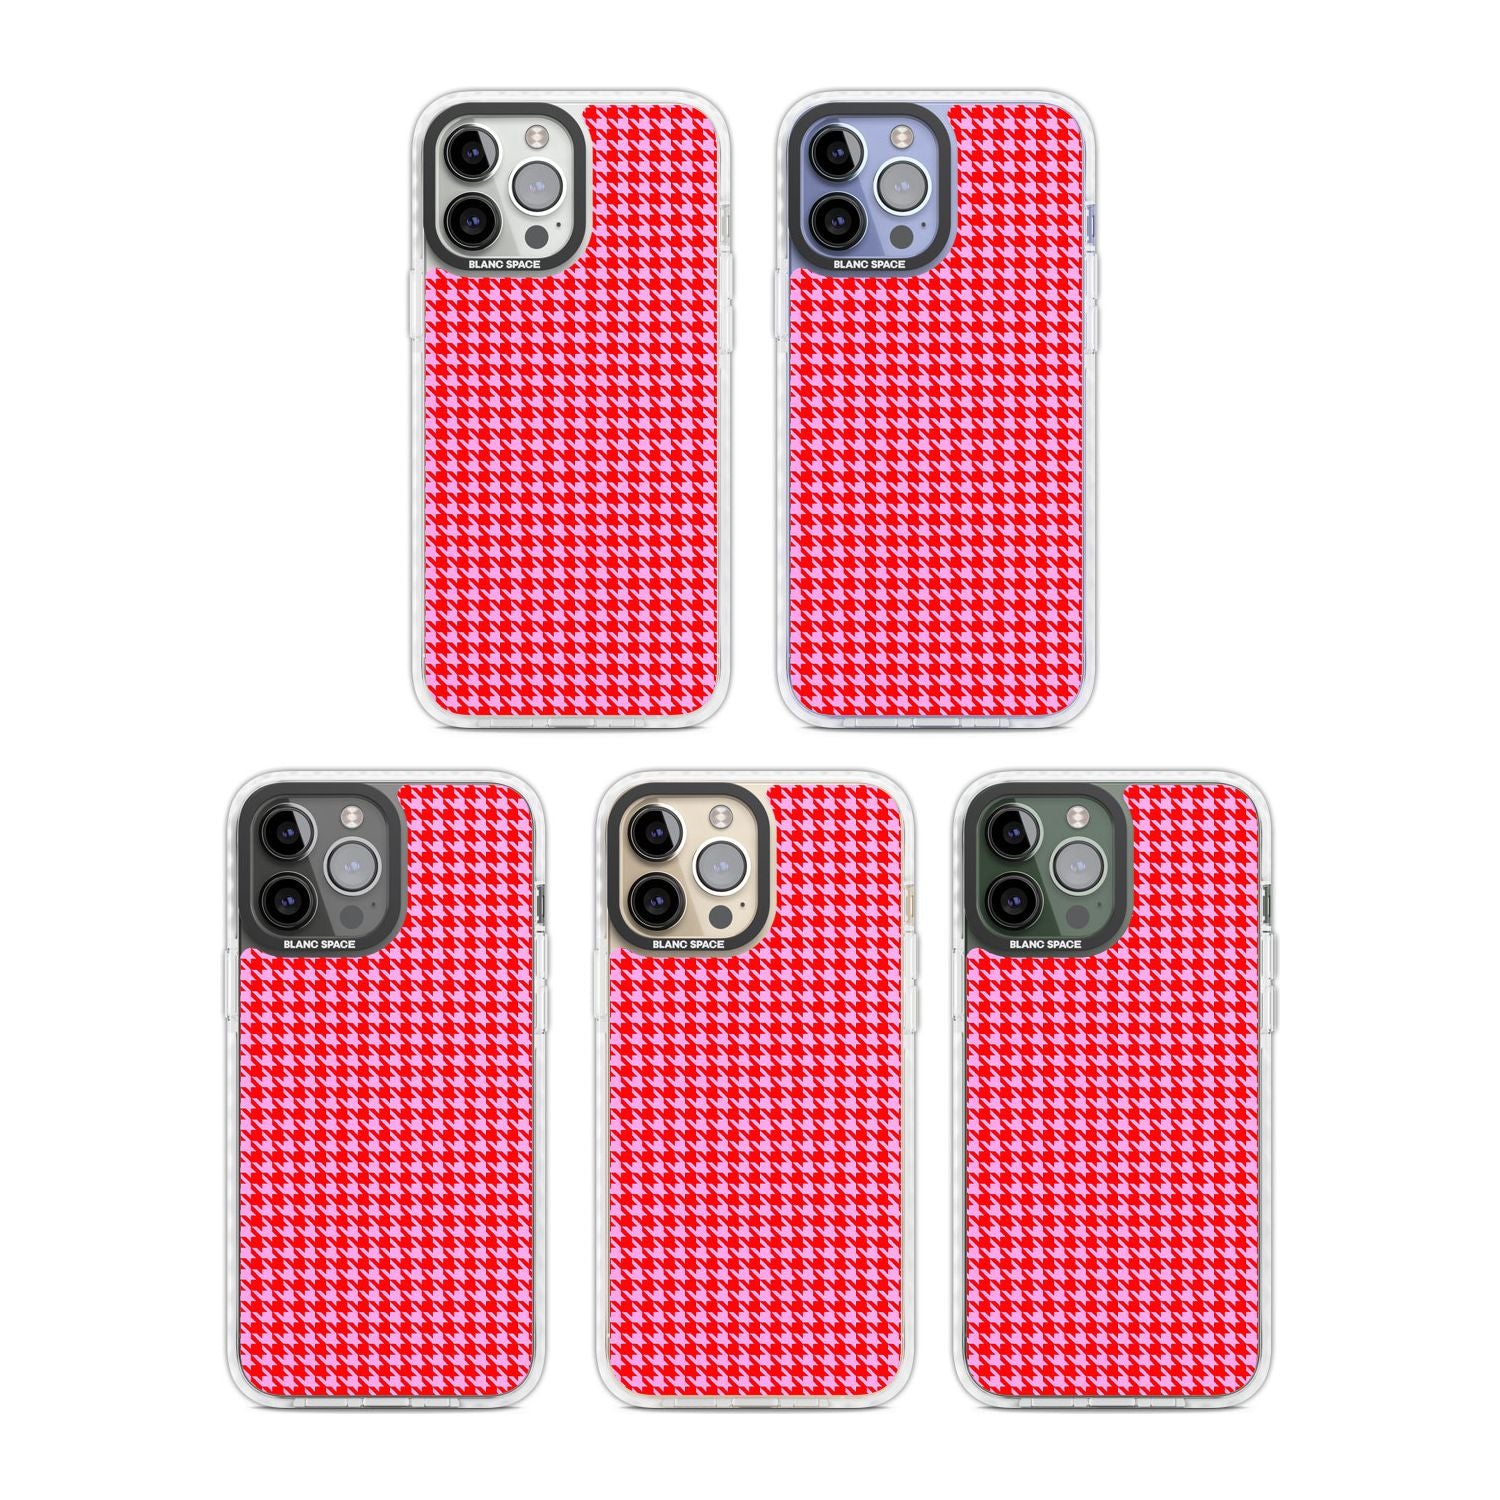 Neon Pink & Red Houndstooth Pattern